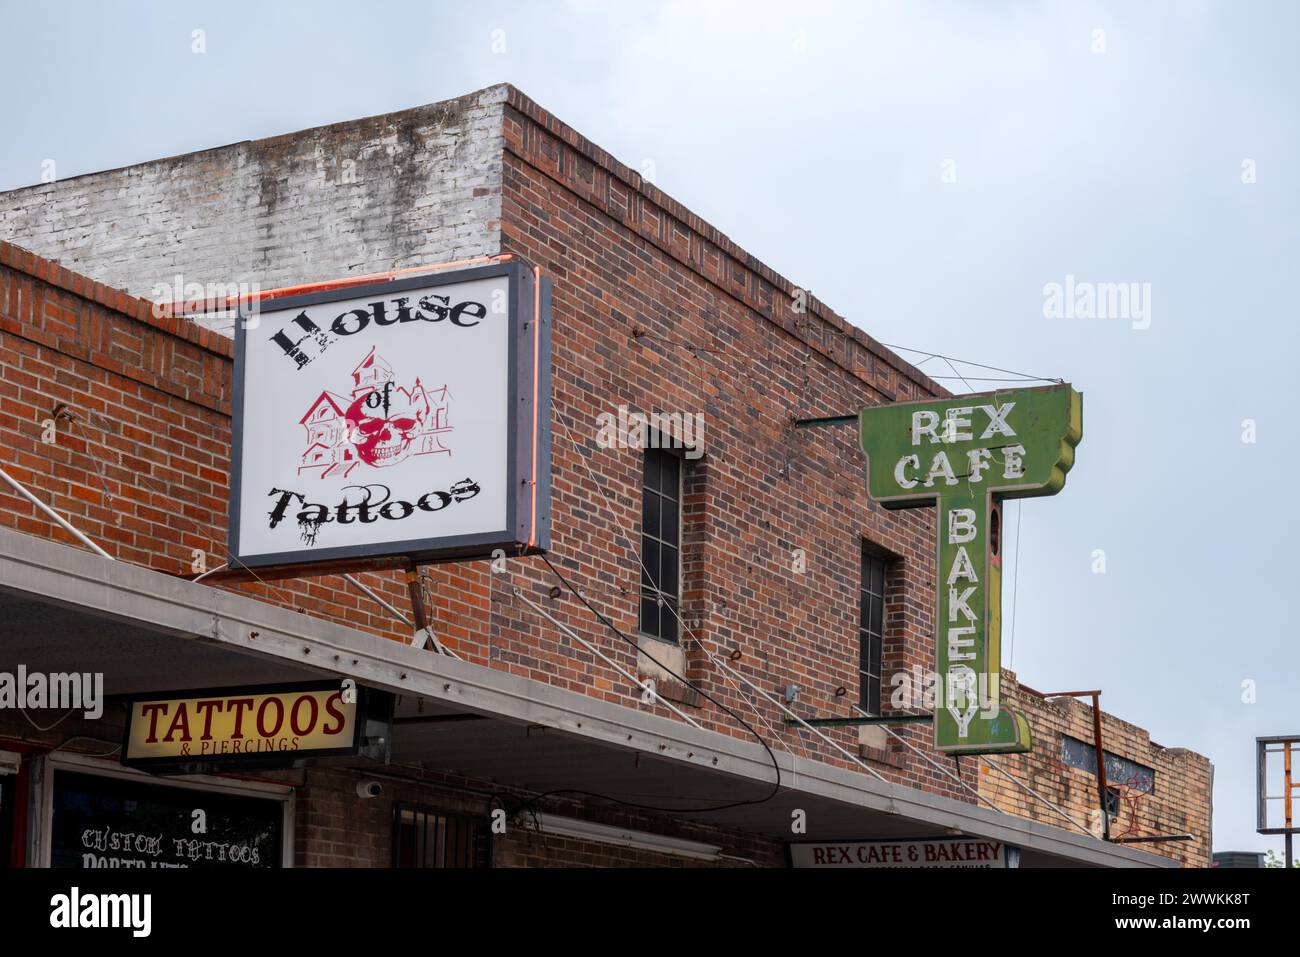 Facade of brick and signs for Rex Cafe, opened 1947, a restaurant in downtown McAllen, and House of Tattoos, Hidalgo County, Texas, USA. Stock Photo